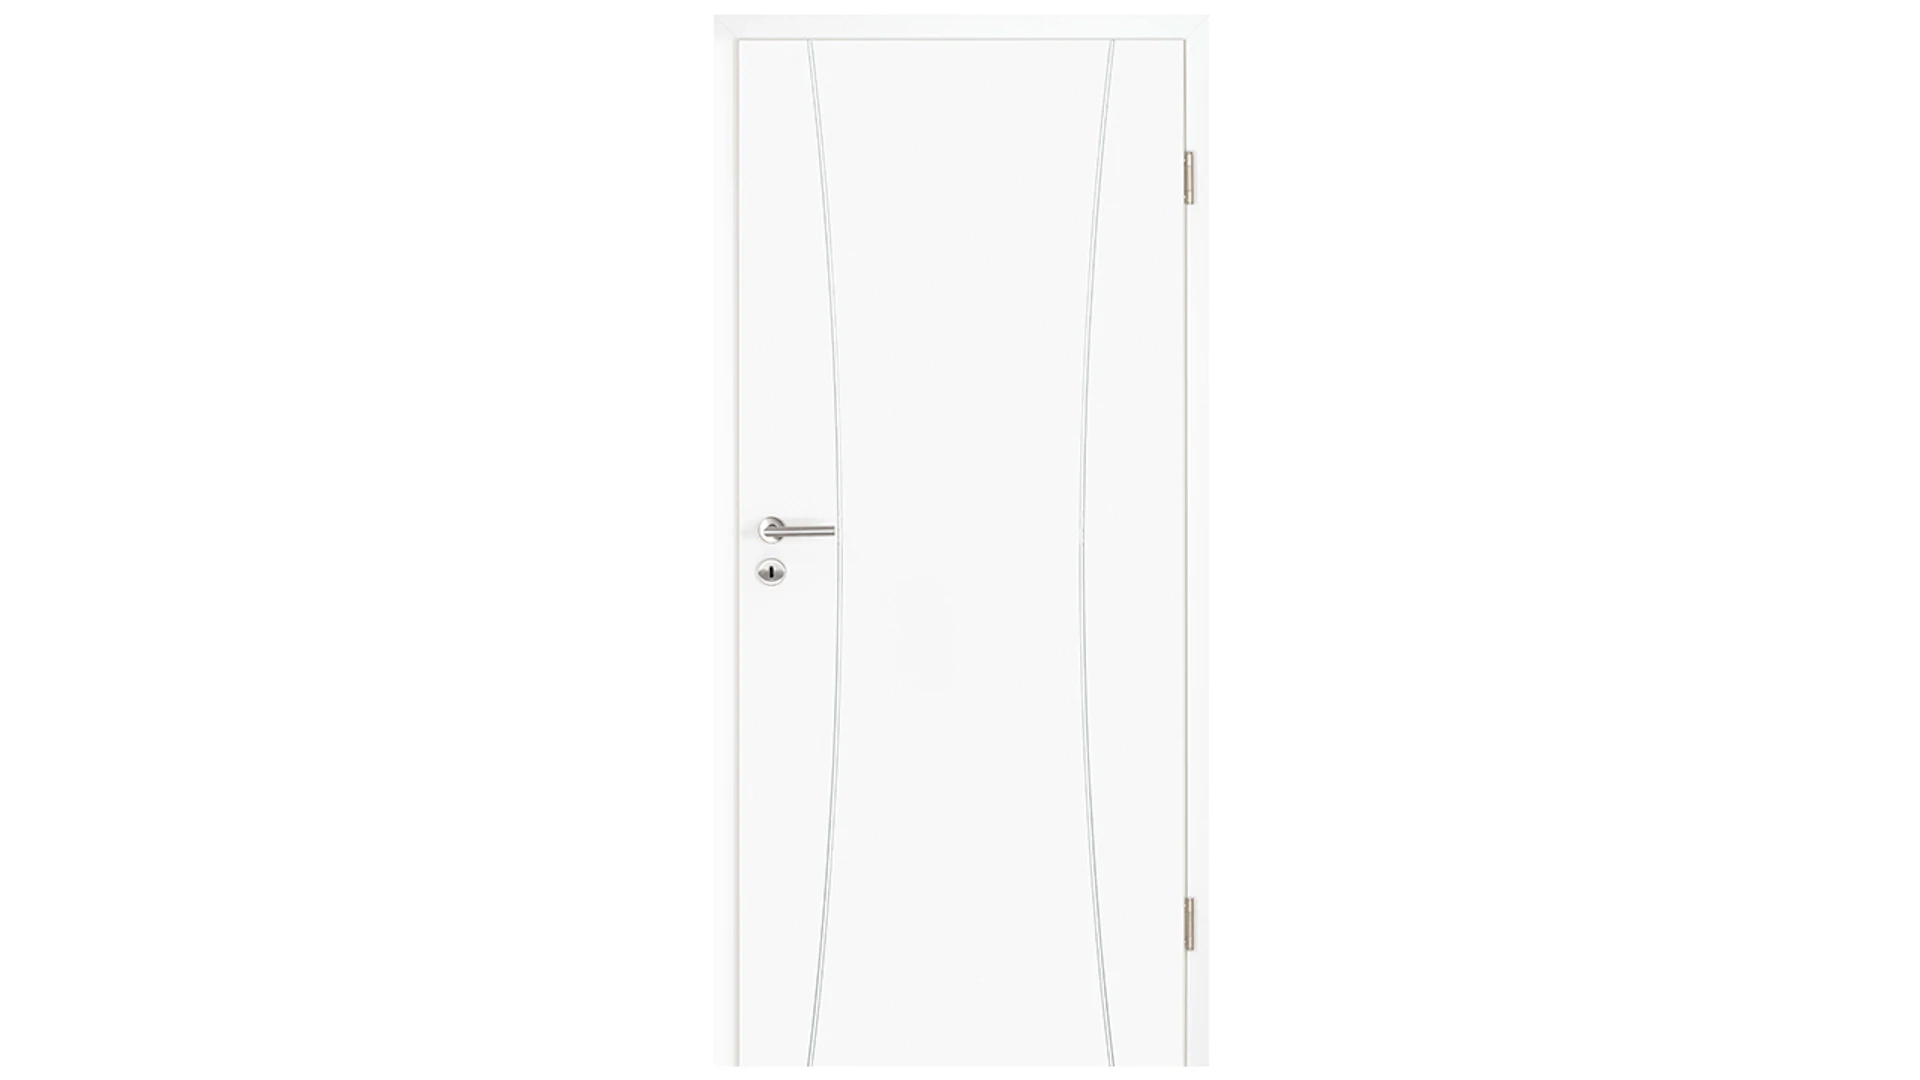 planeo interior door lacquer 2.0 - Kunibald 9010 white lacquer 2110 x 985 mm DIN R - round RSP hinge 3-t